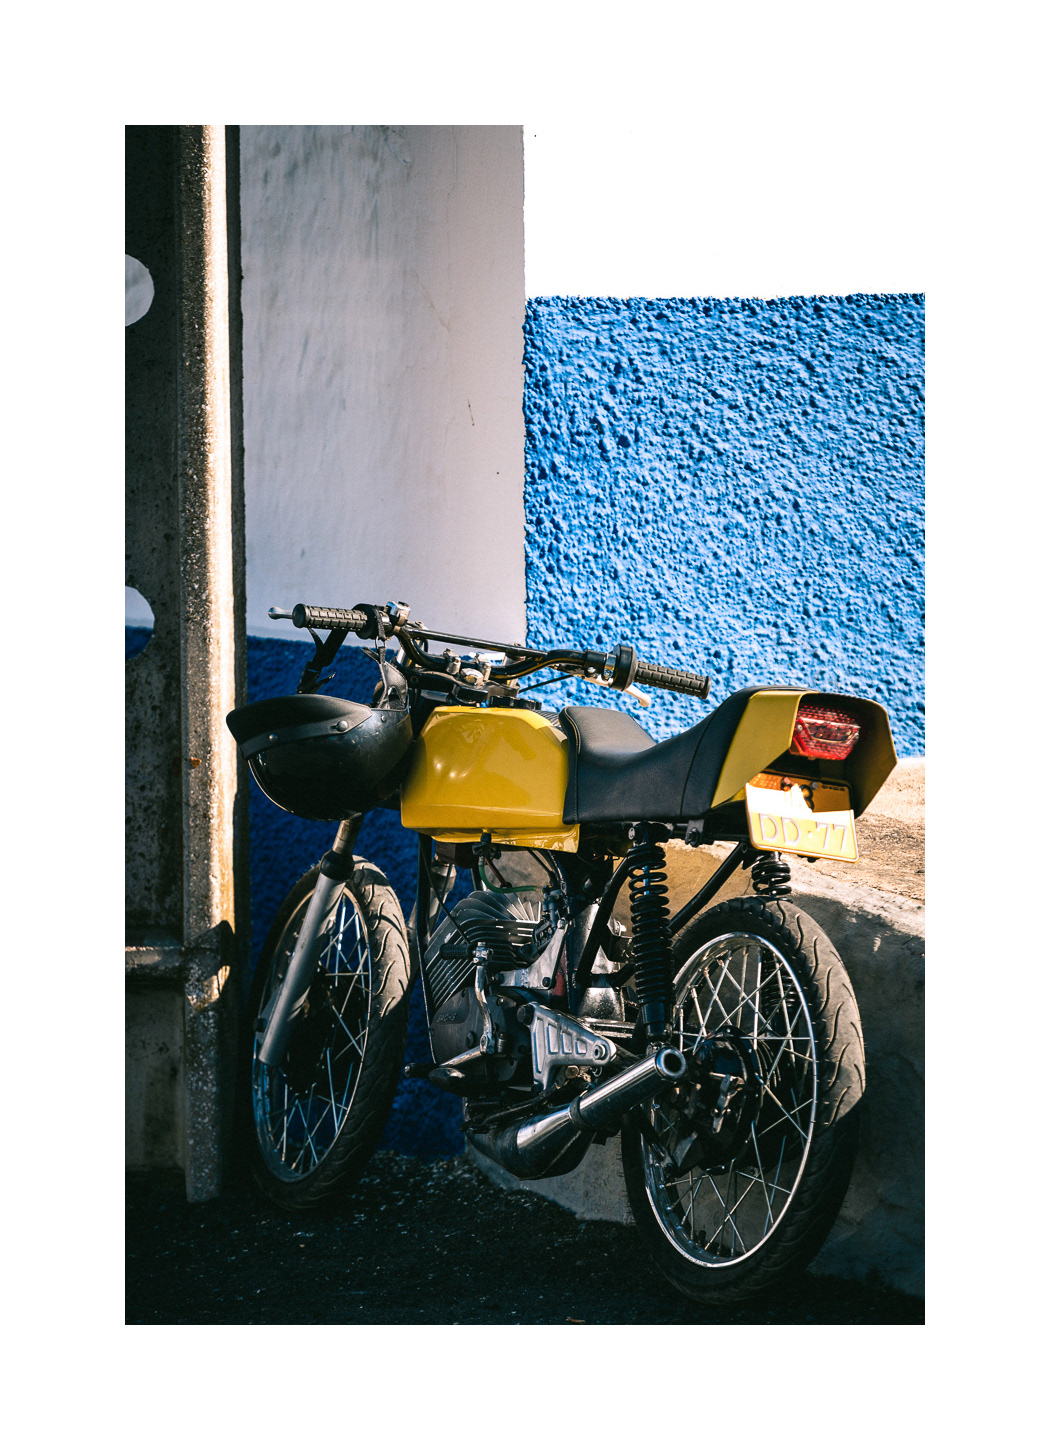 Custom Motorcycle motorbike motorcycle motorcycle photography Portugal vintage motorcycle